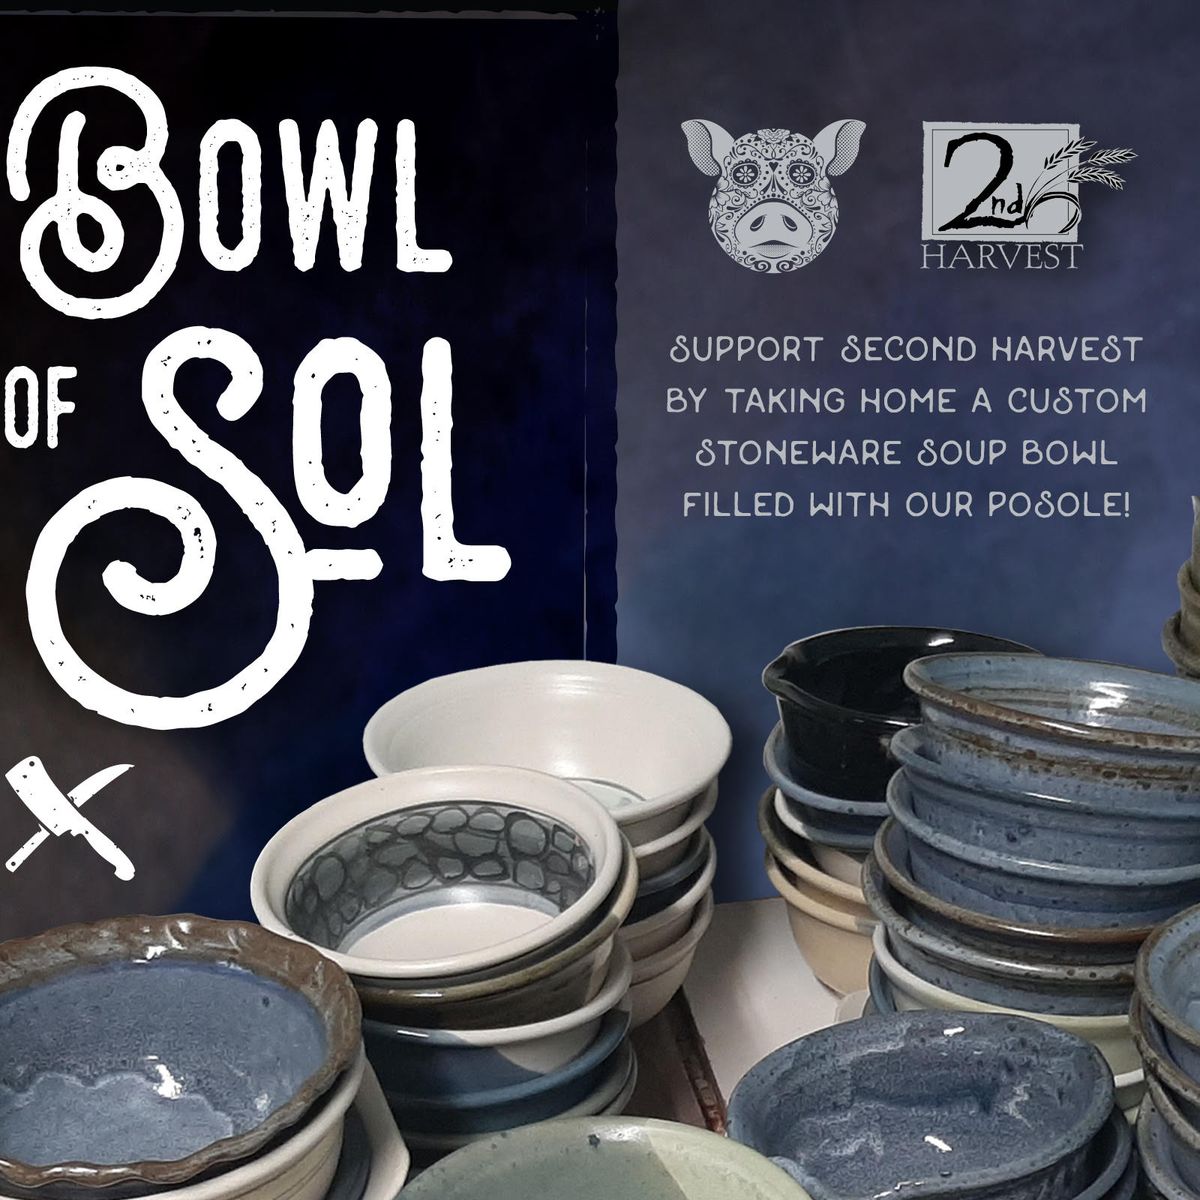 Bowl of Sol benefits the food bank Second Harvest.  (Courtesy)